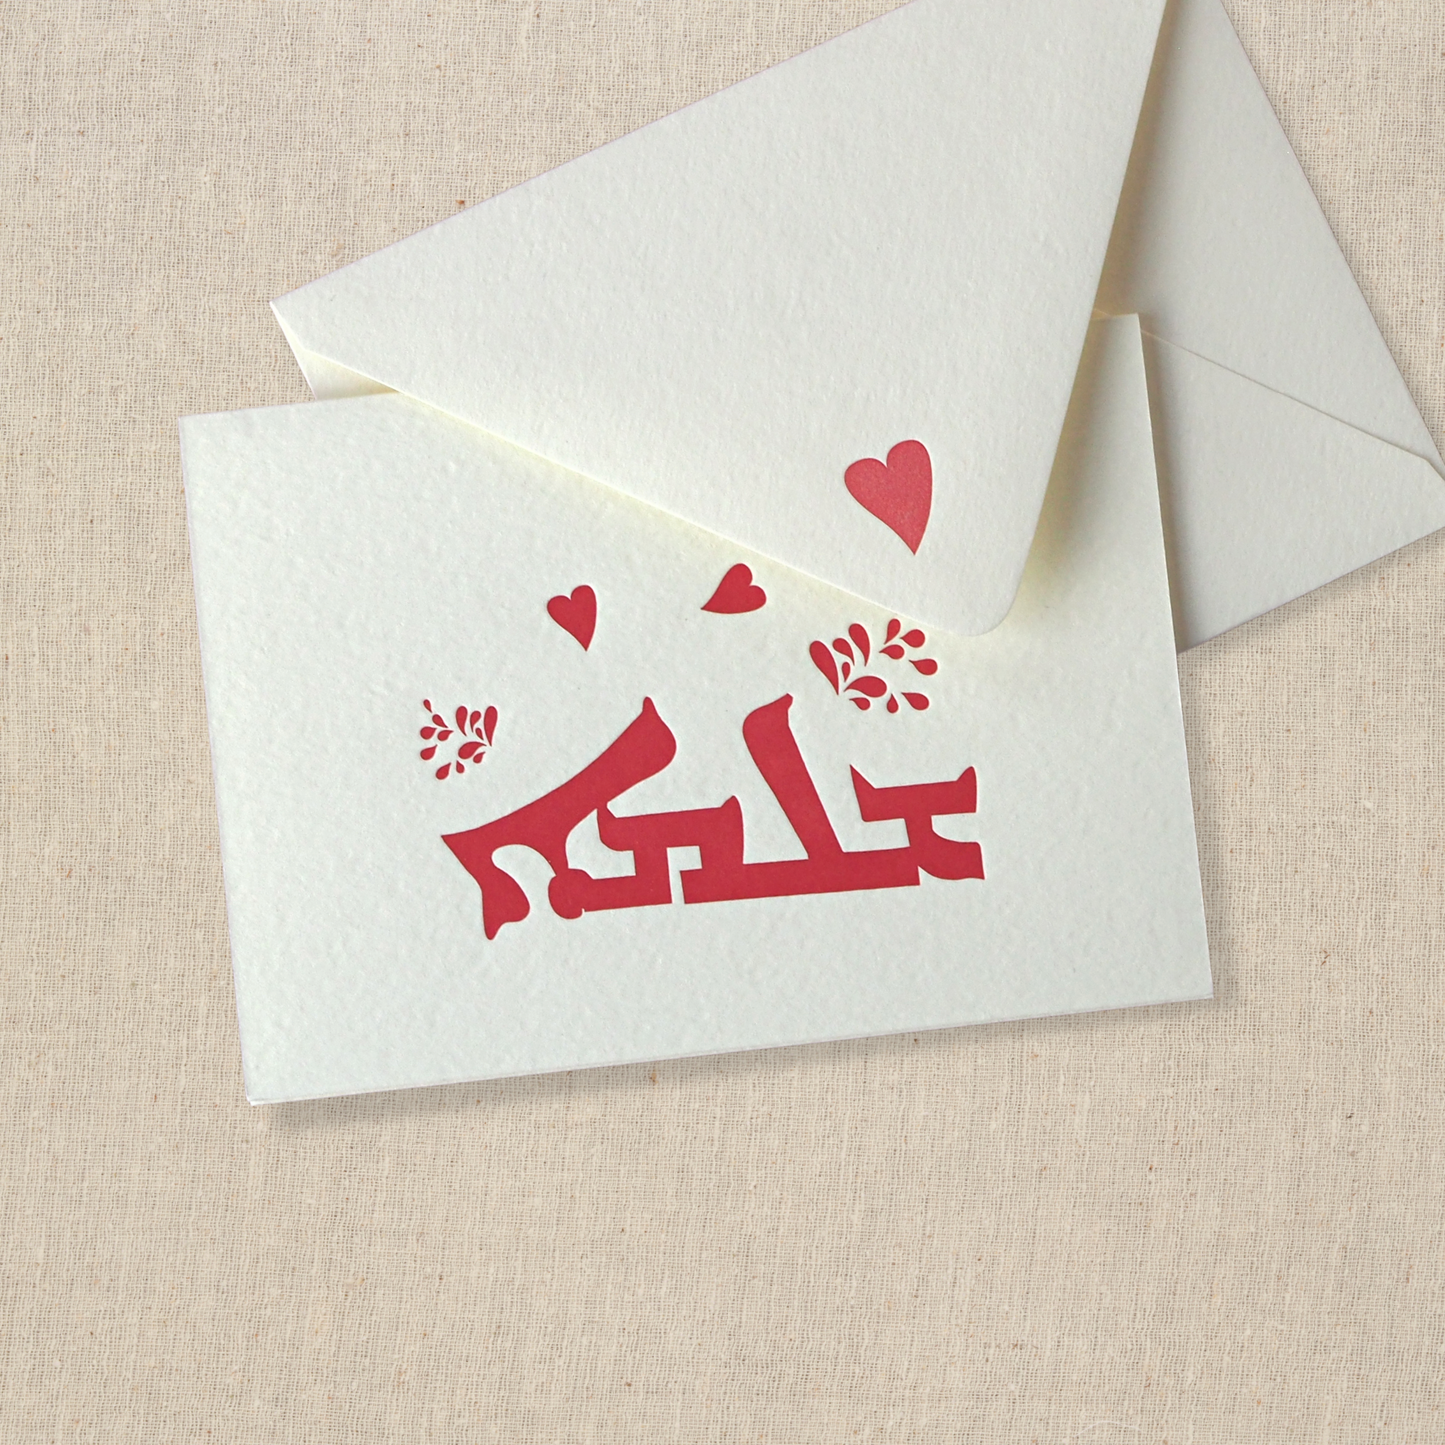 Notecard on cotton paper. Red text in syriac with red hearts. Transliteration is shlama. Translates to hello in English. White envelope with red heart printed on back flap is next to card.